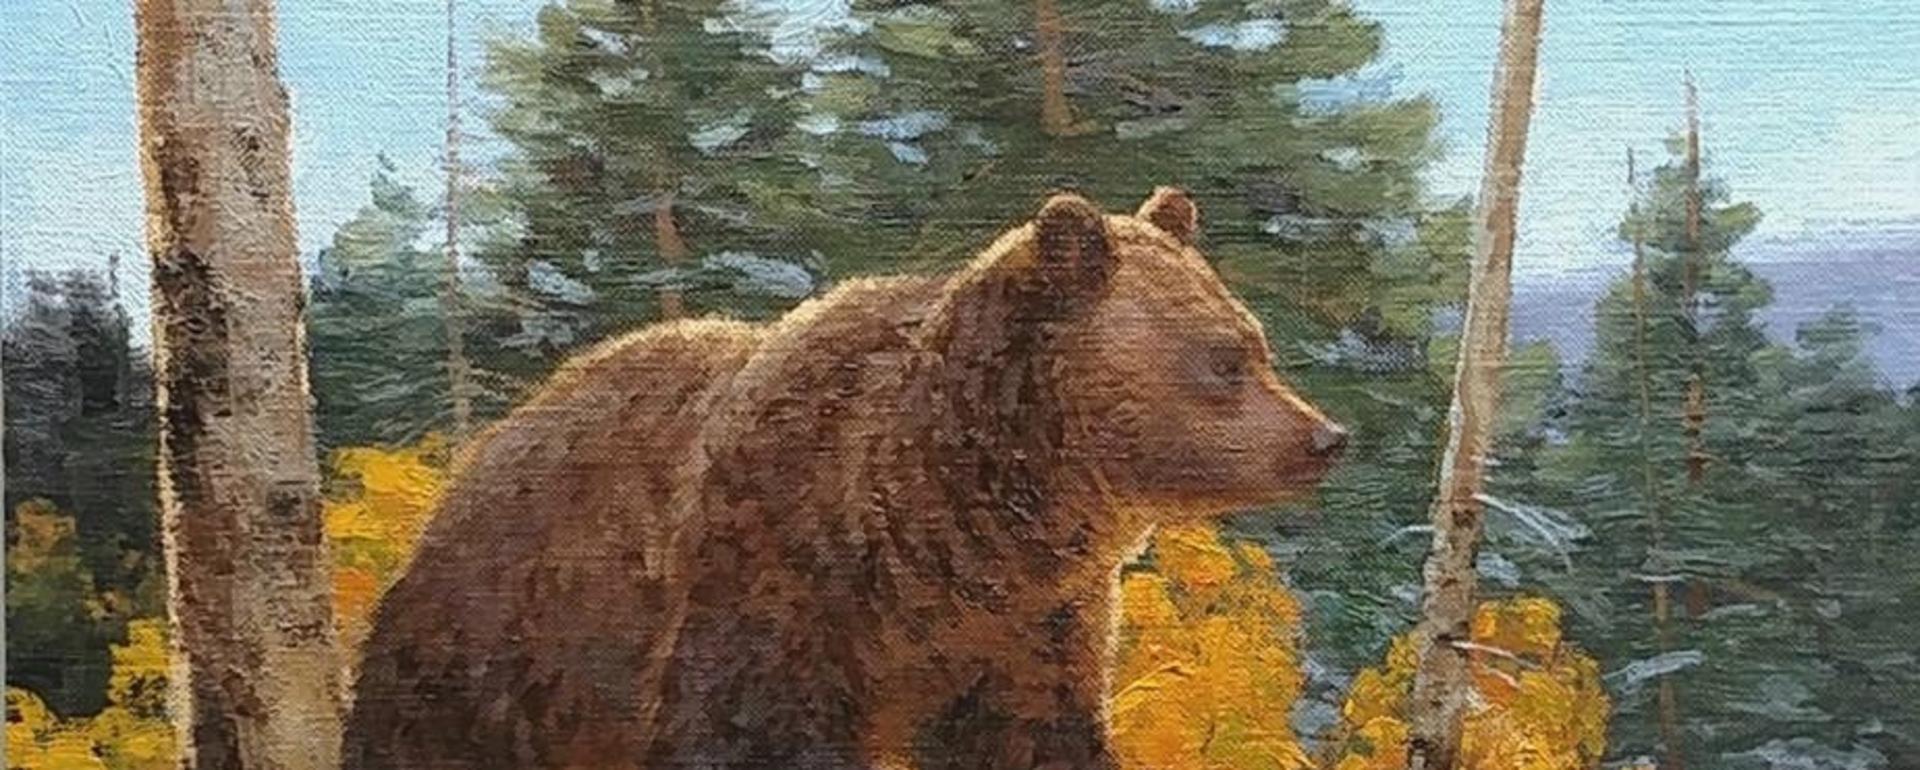 Griz spotted only a few miles from downtown Bozeman